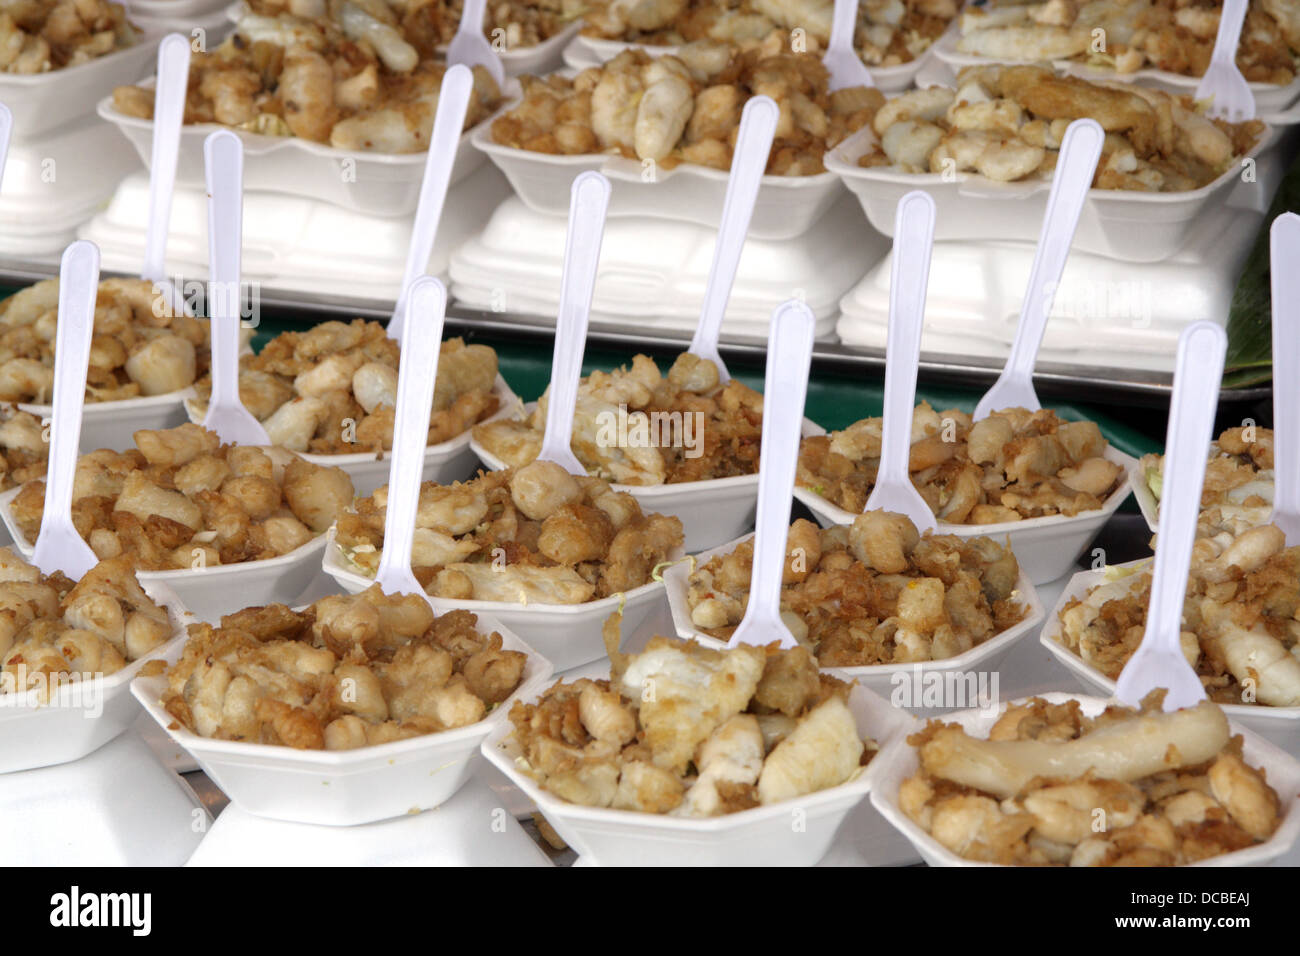 Fried squid eggs on sale Stock Photo